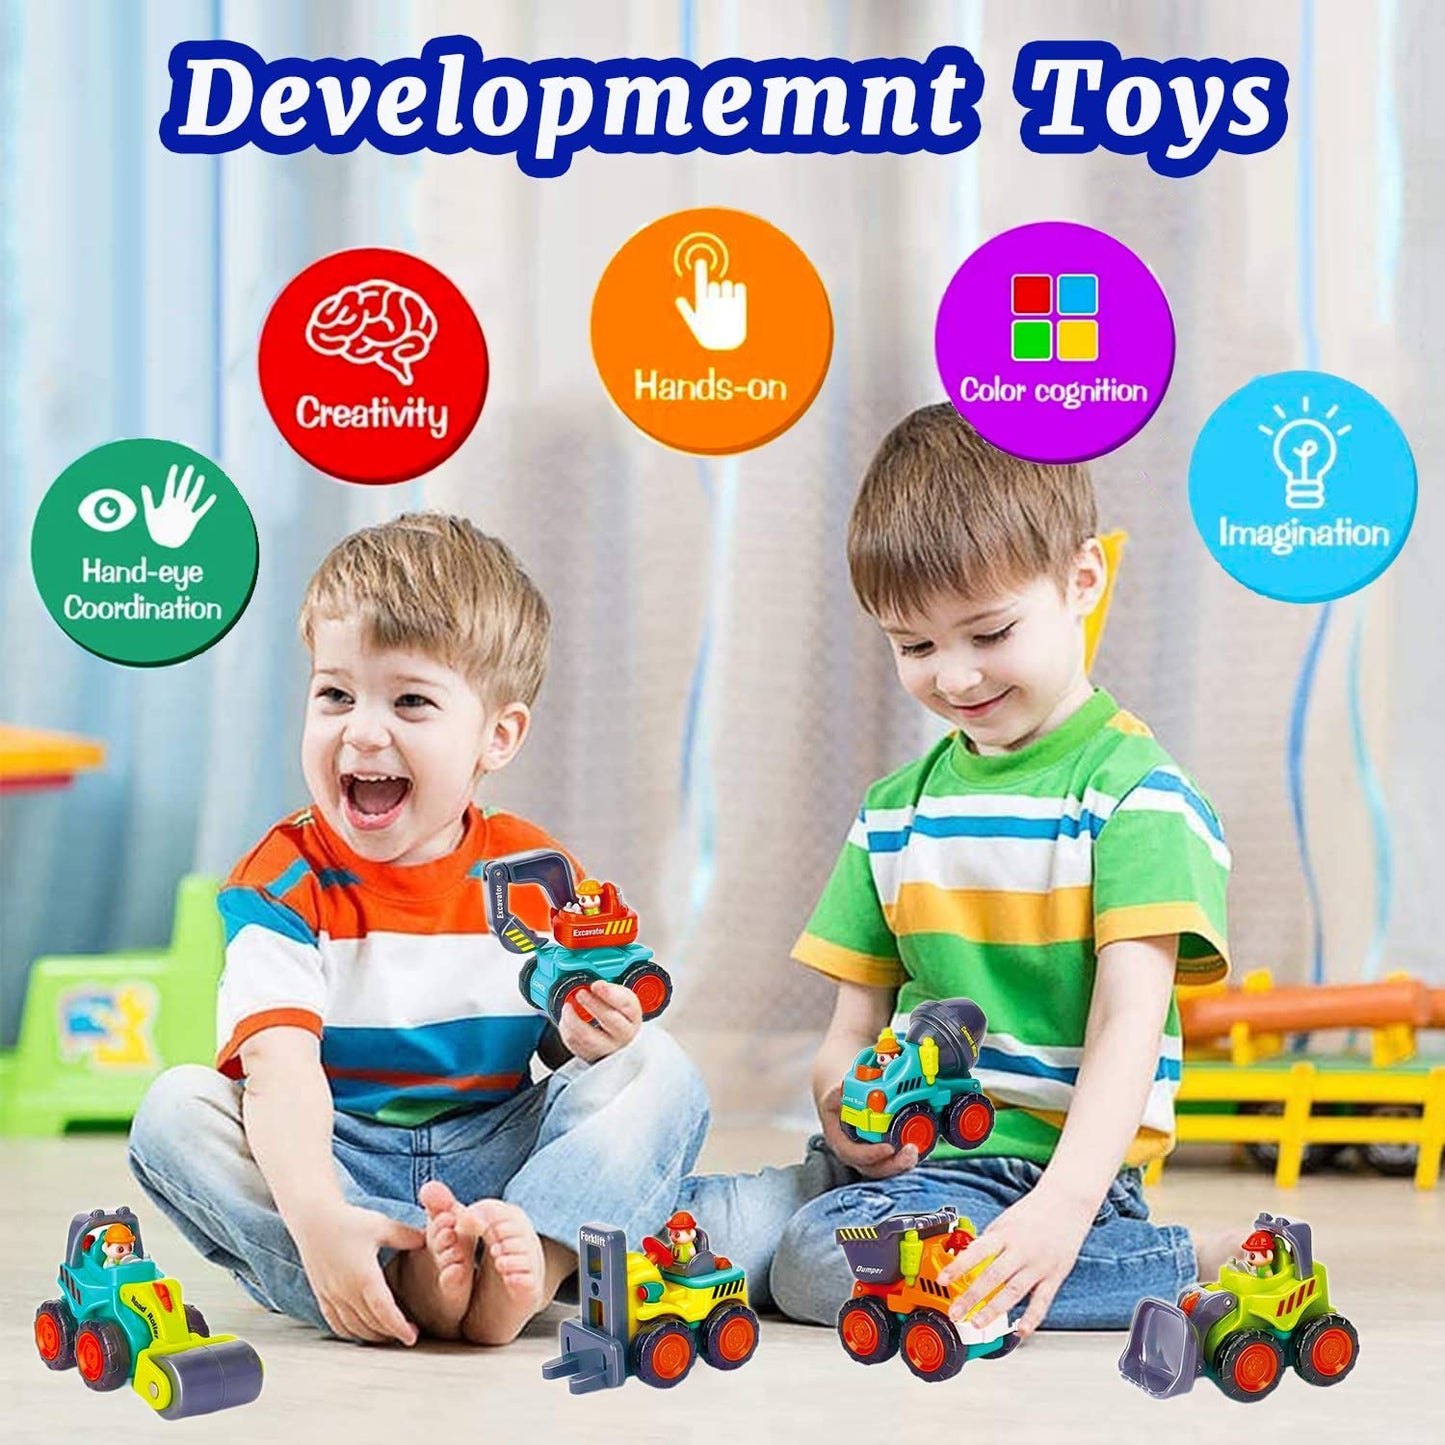 Mini Toddler Construction Vehicles Playsets - Dump Truck , Excavator, Bulldozer, Cement Mixer, Forklift, Road Roller, Construction Car Toys for 12 to 18 Months Old Boy